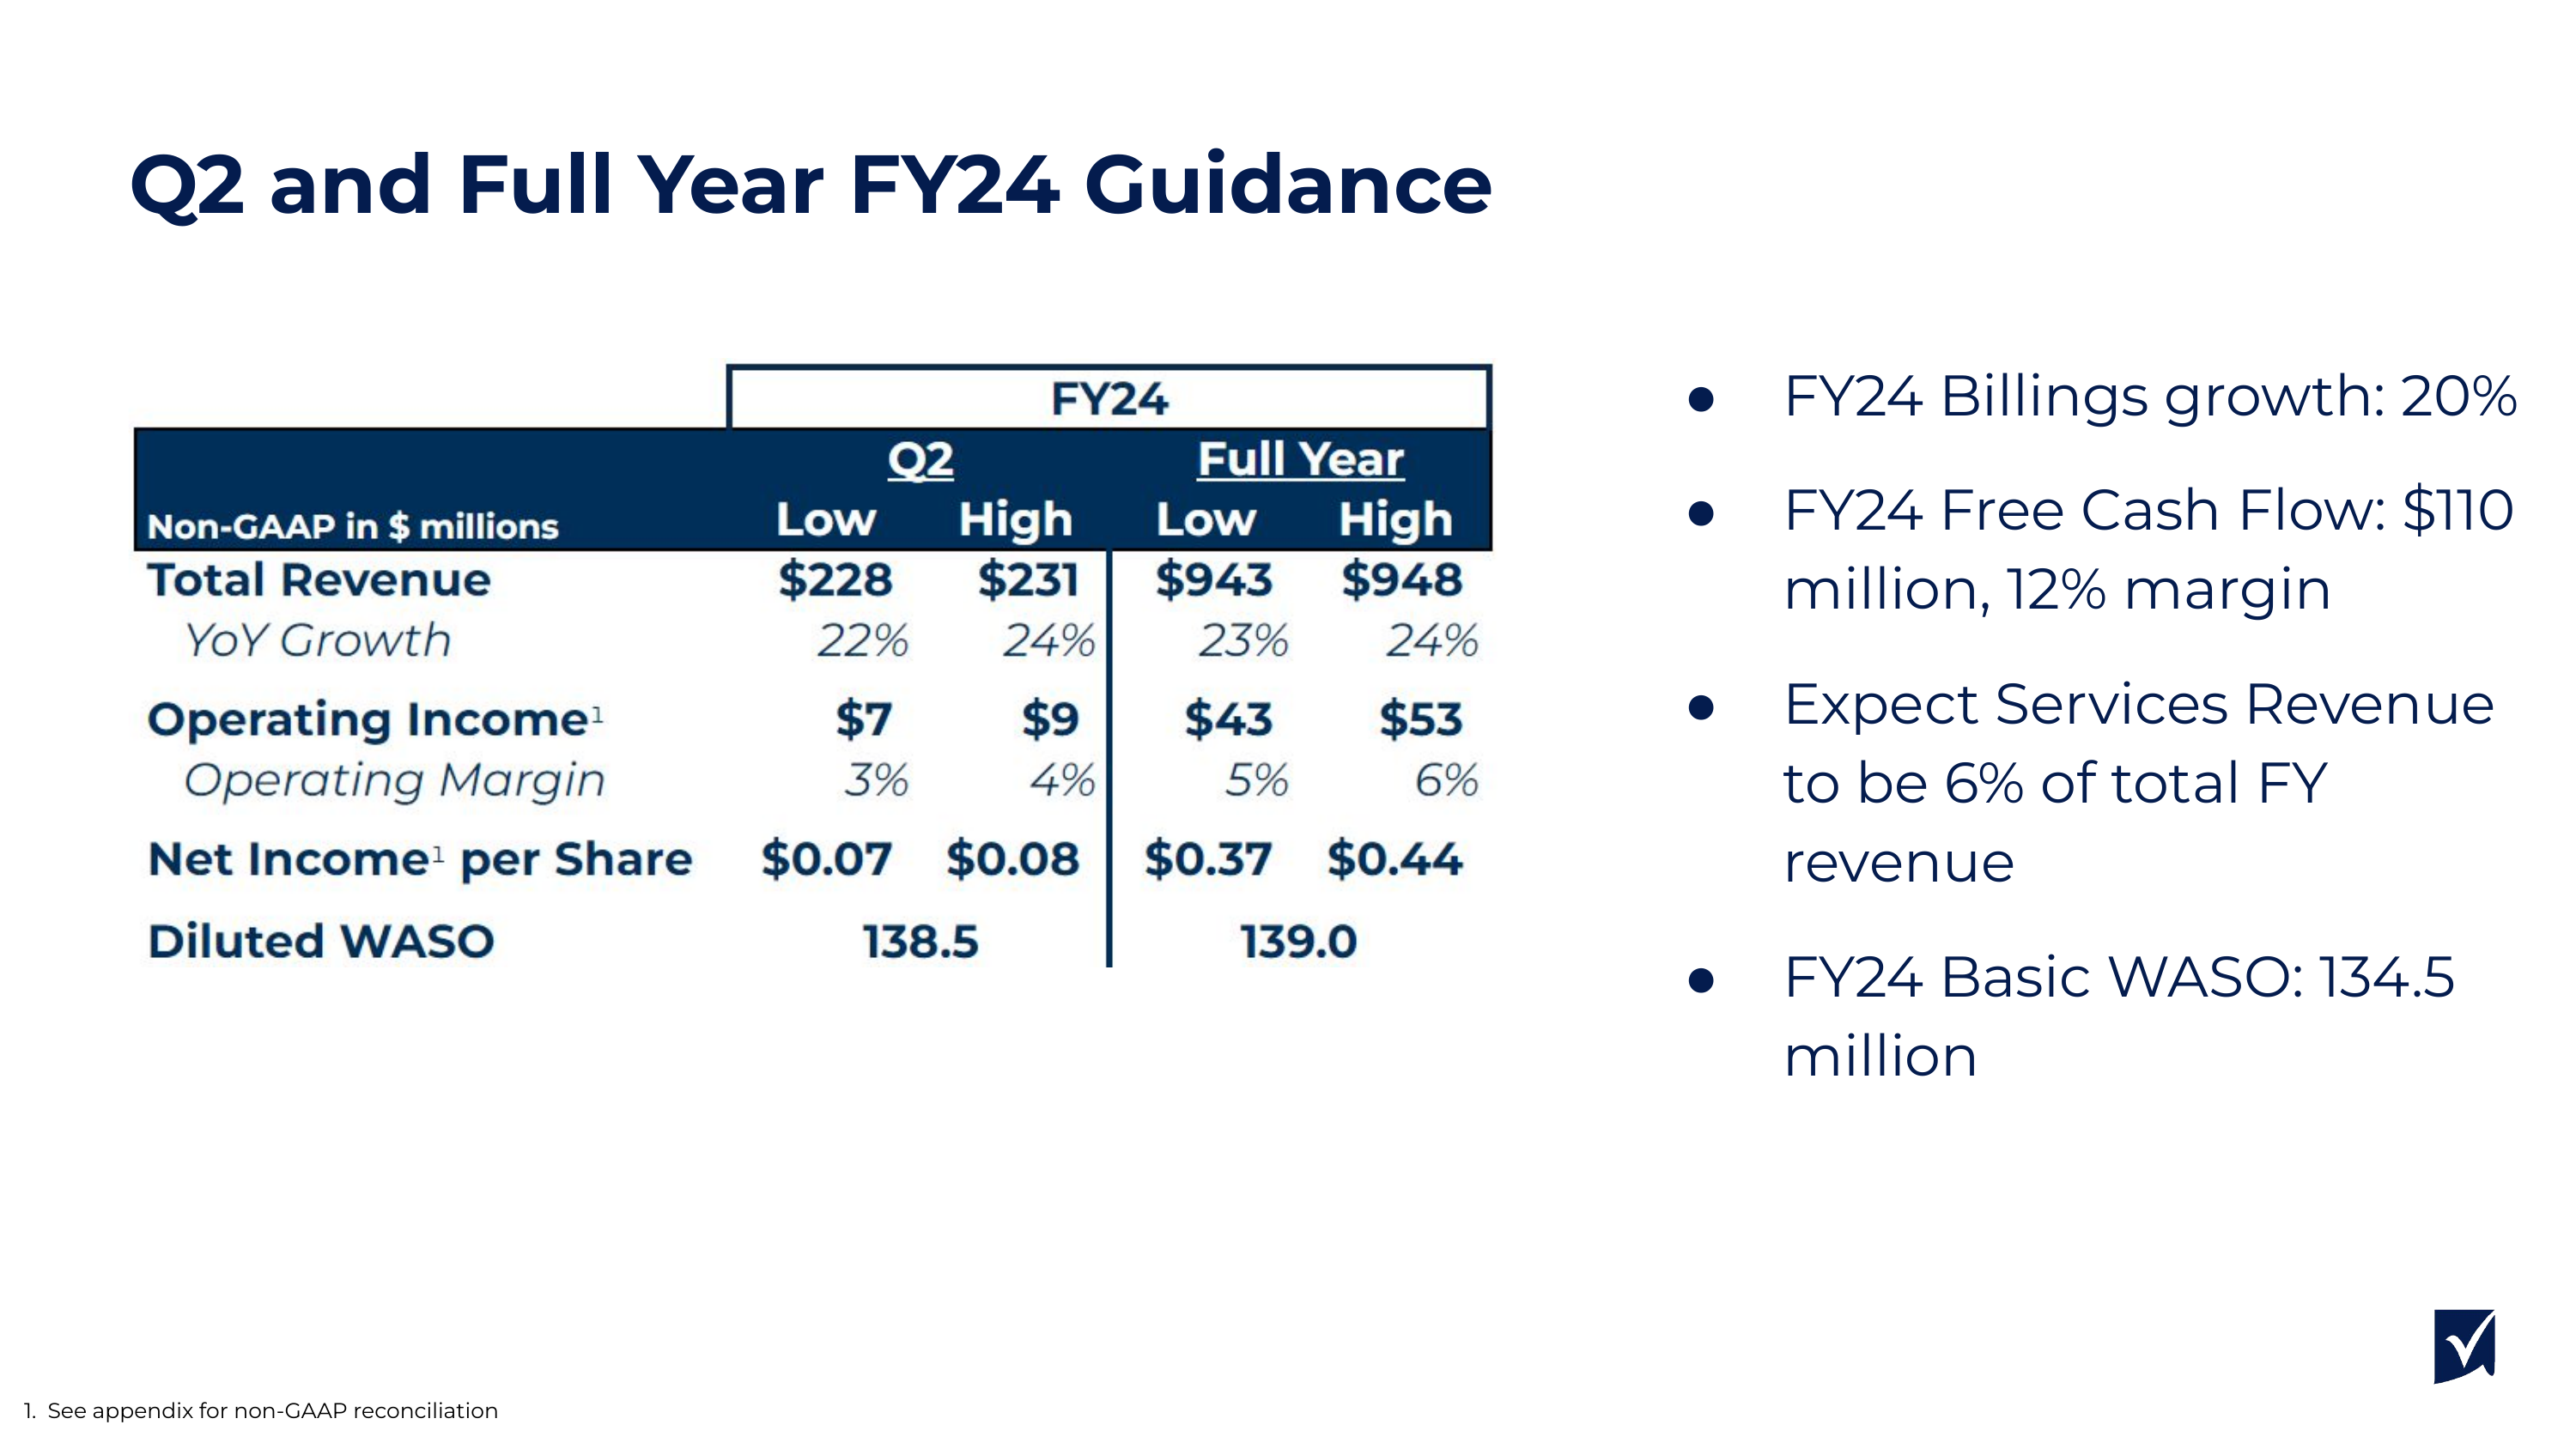 Q2 and Full Year FY2